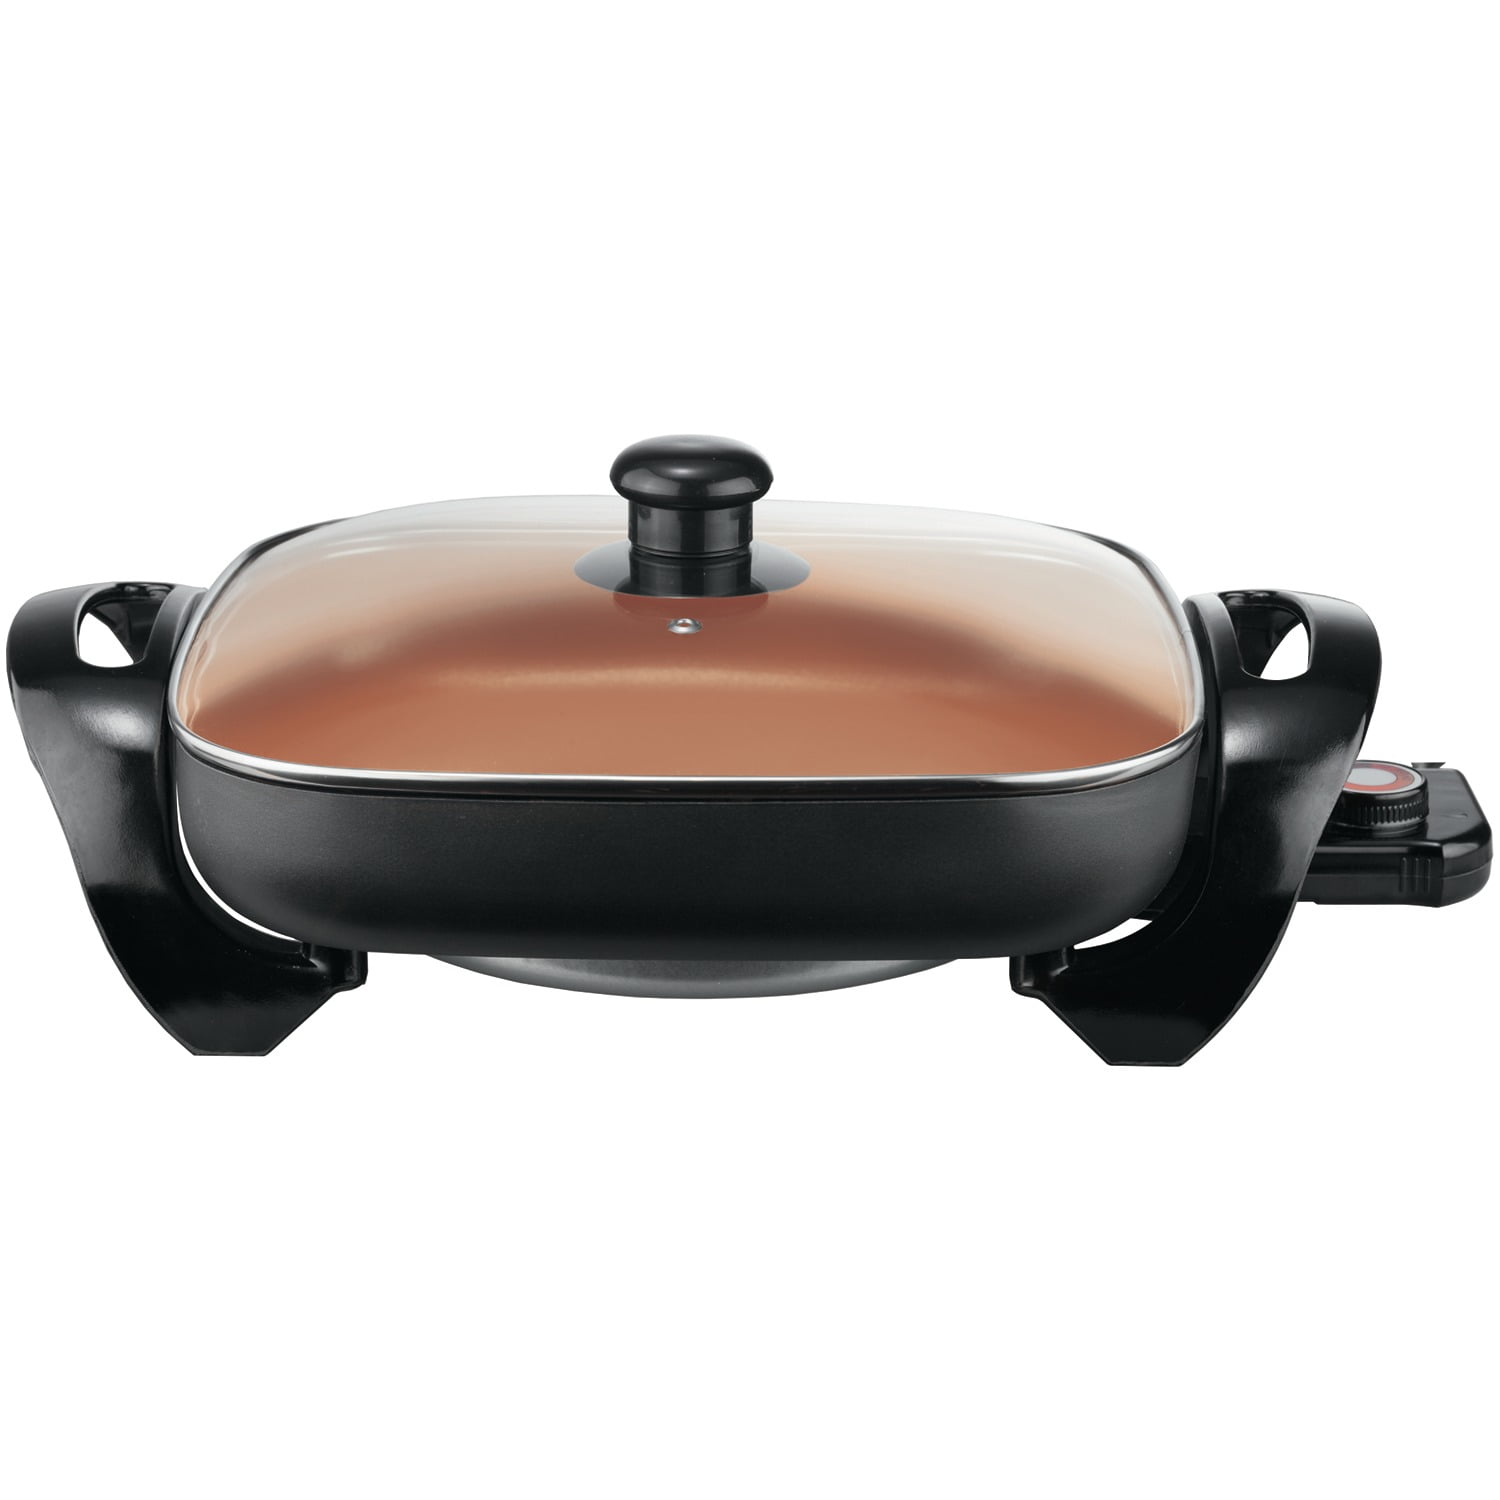 Copper Chef 7-52356-82039-8 Ceramic Stainless Steel 12 Electric Skillet